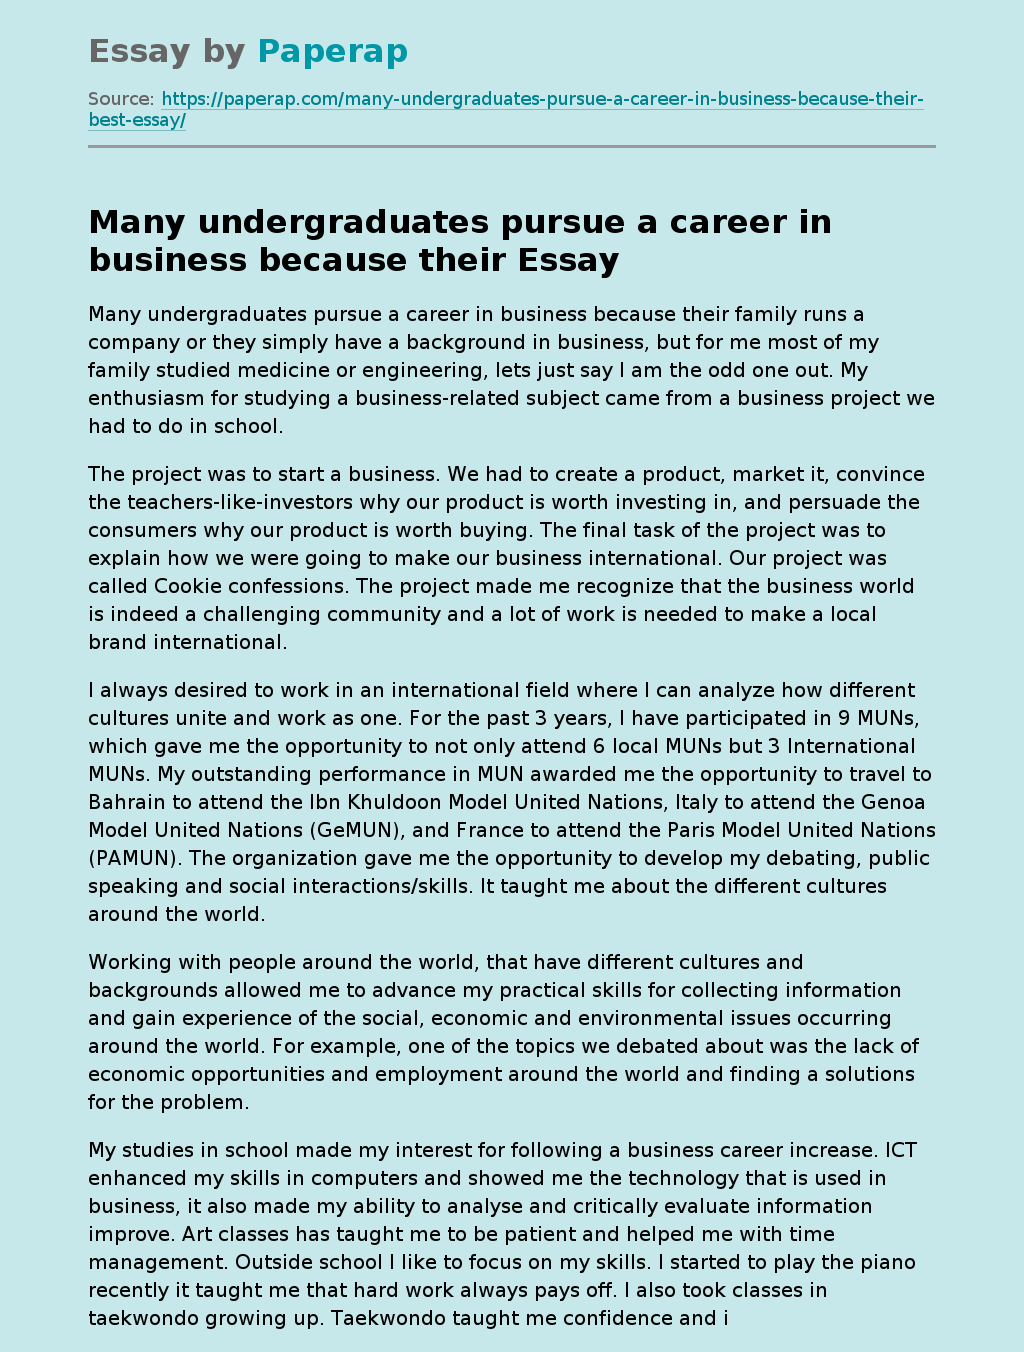 Many undergraduates pursue a career in business